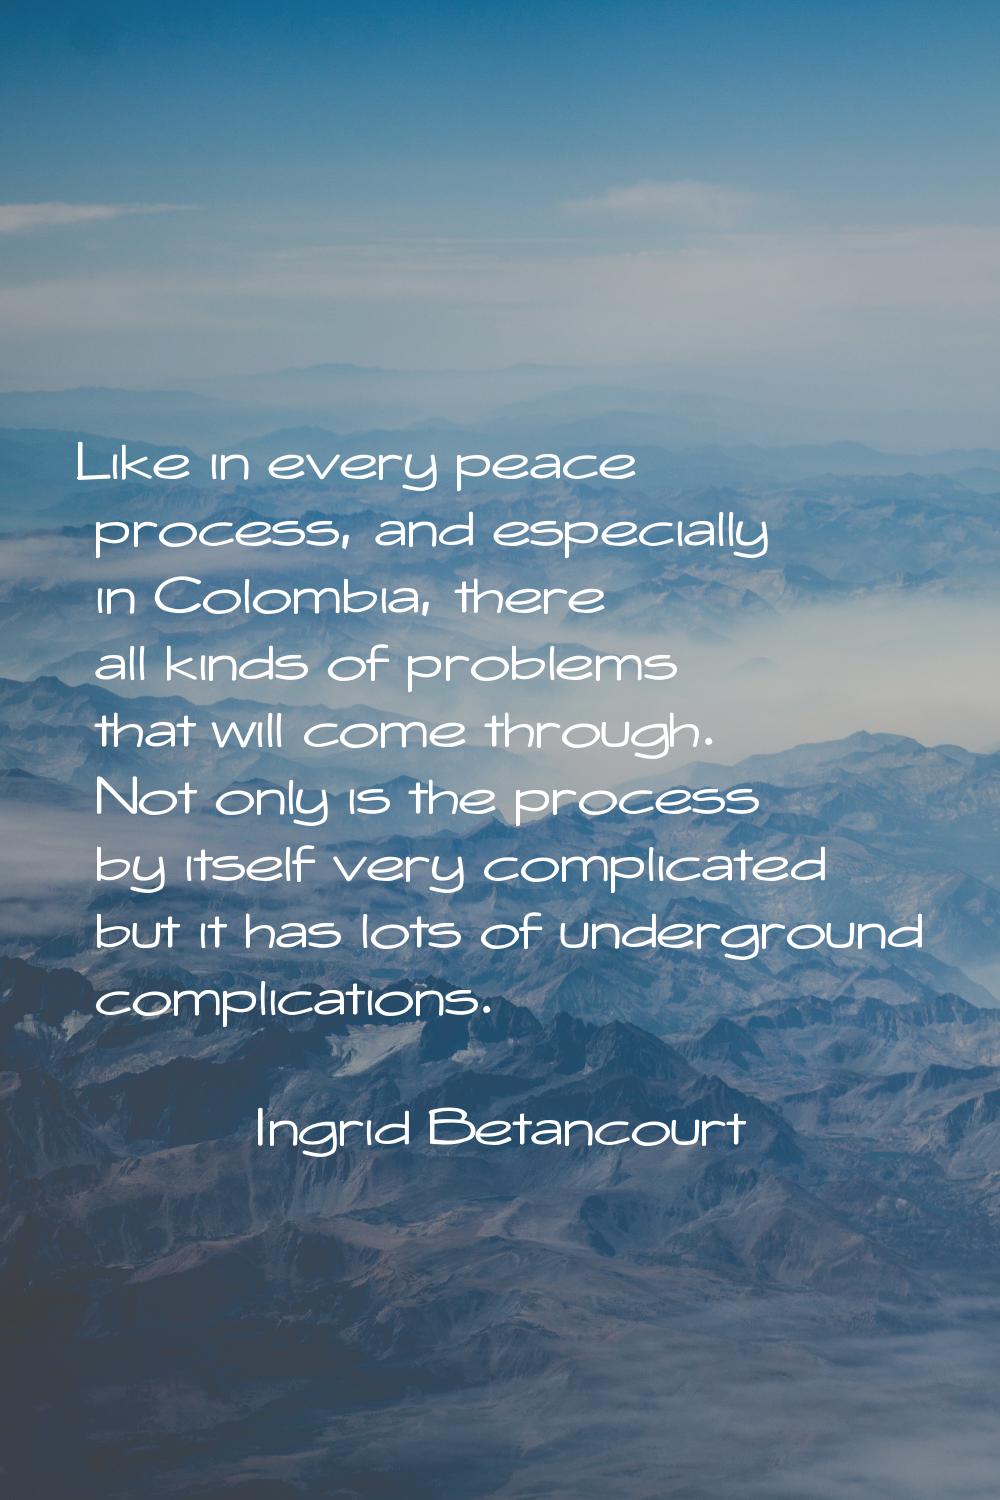 Like in every peace process, and especially in Colombia, there all kinds of problems that will come